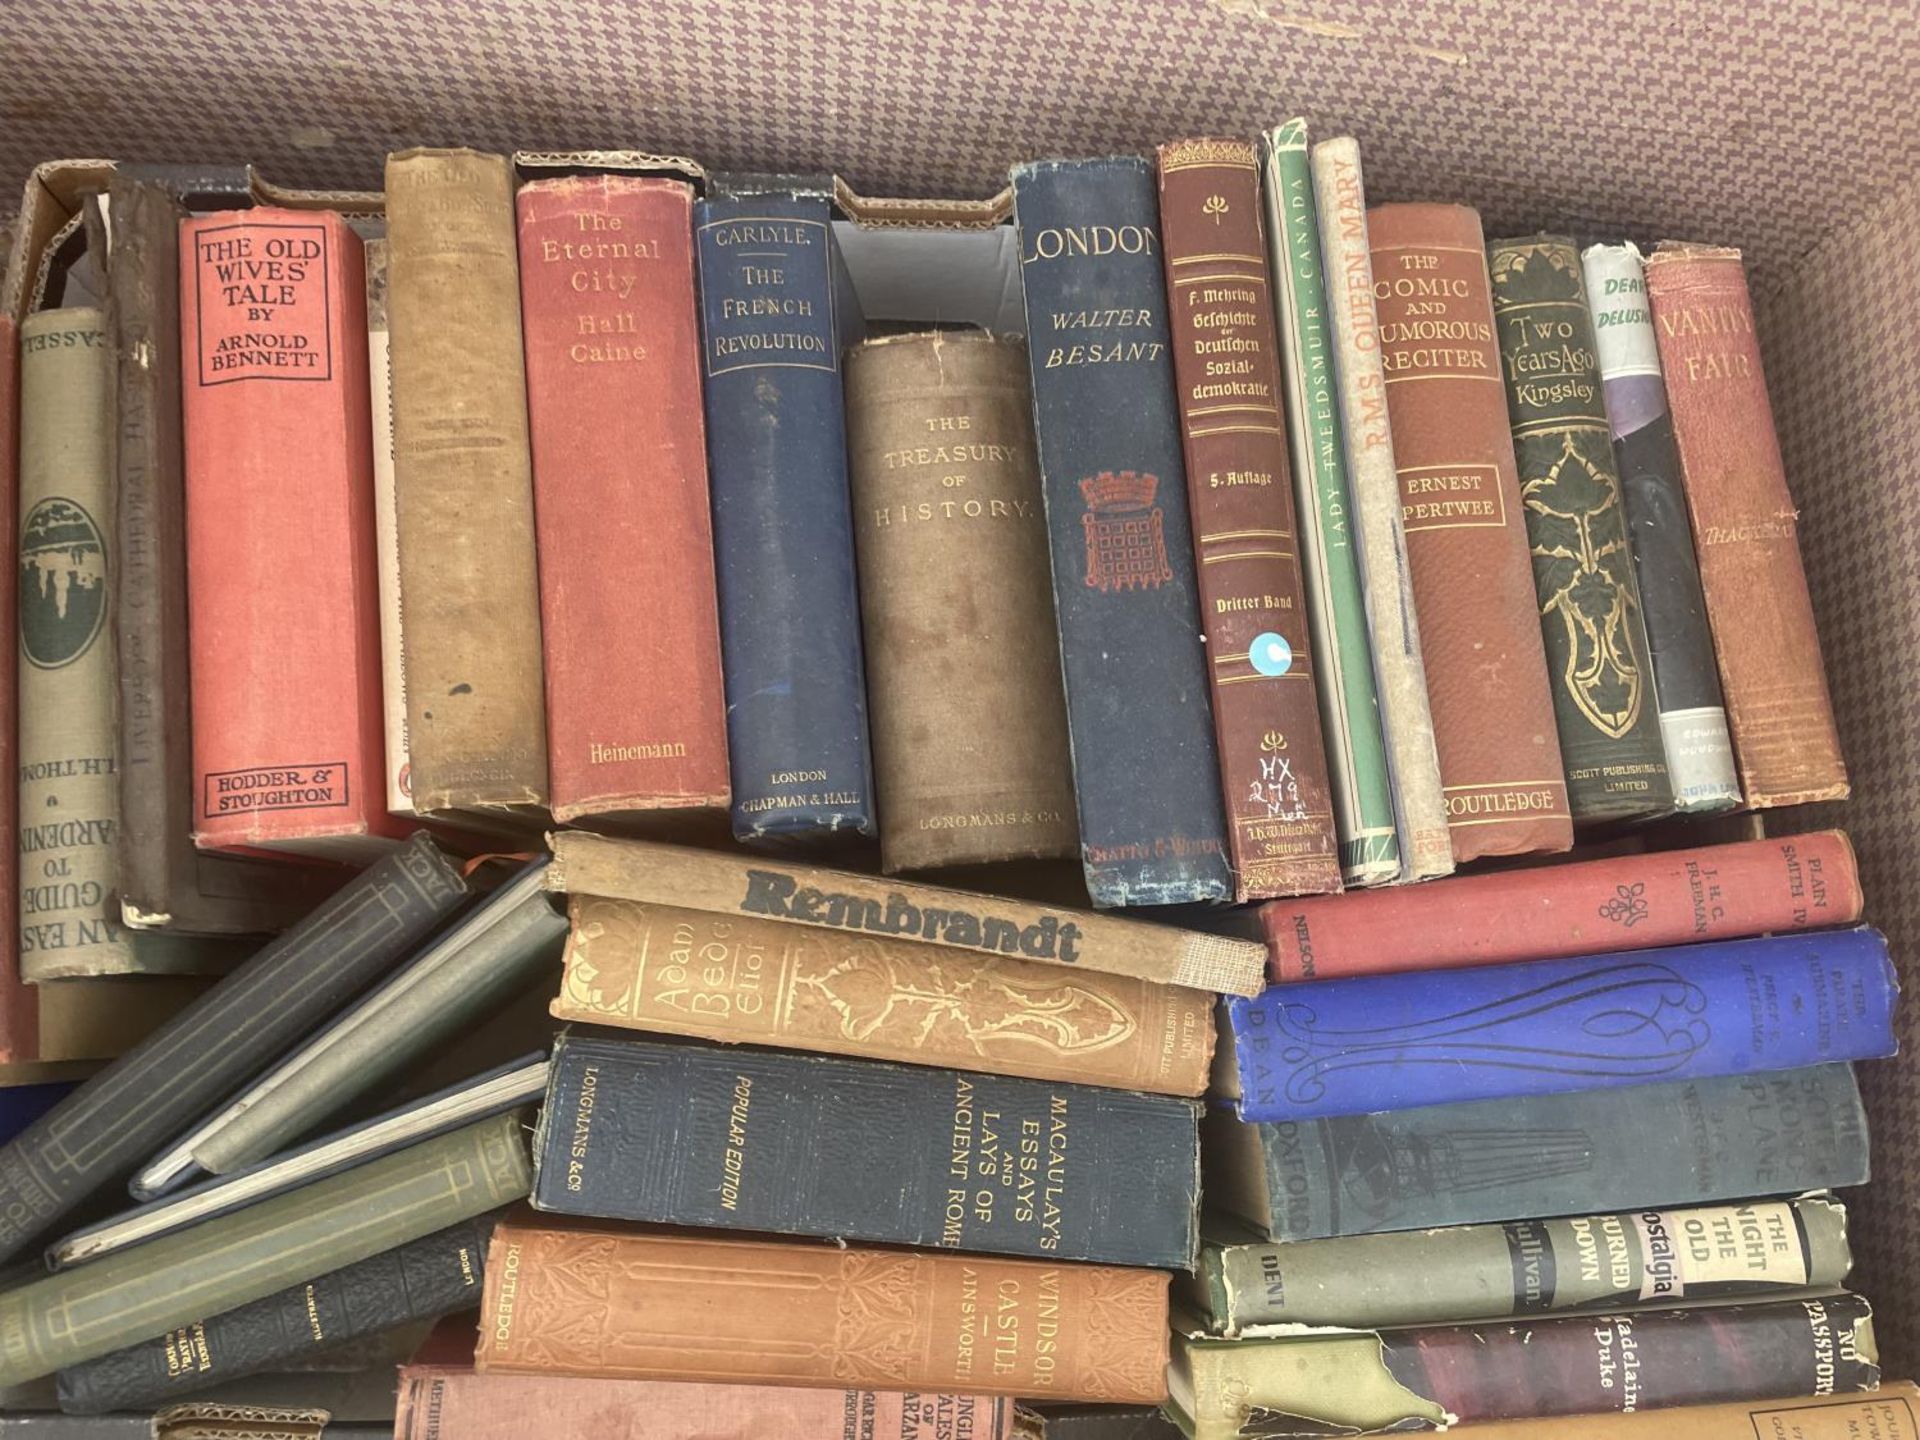 A VINTAGE TRAVEL TRUNK CONTAINING VARIOUS VINTAGE BOOKS - Image 3 of 5